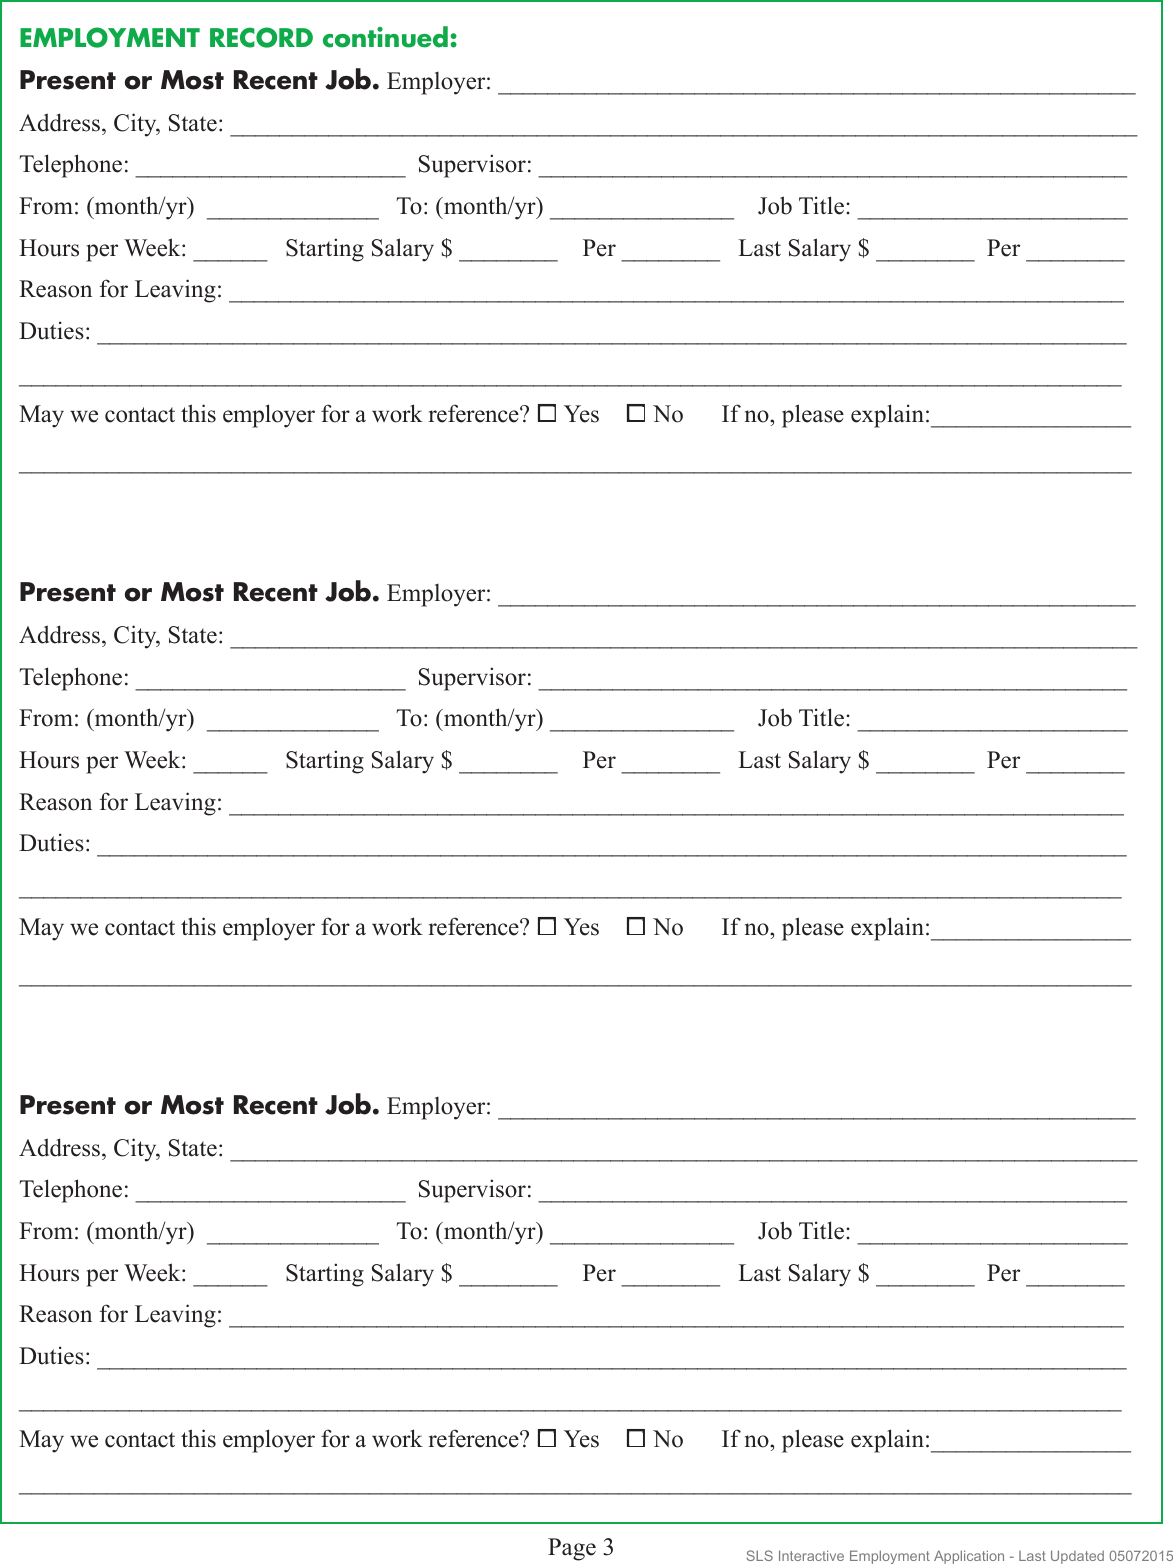 Page 3 of 4 - Sunlight Supply-Interactive-Employment-Application